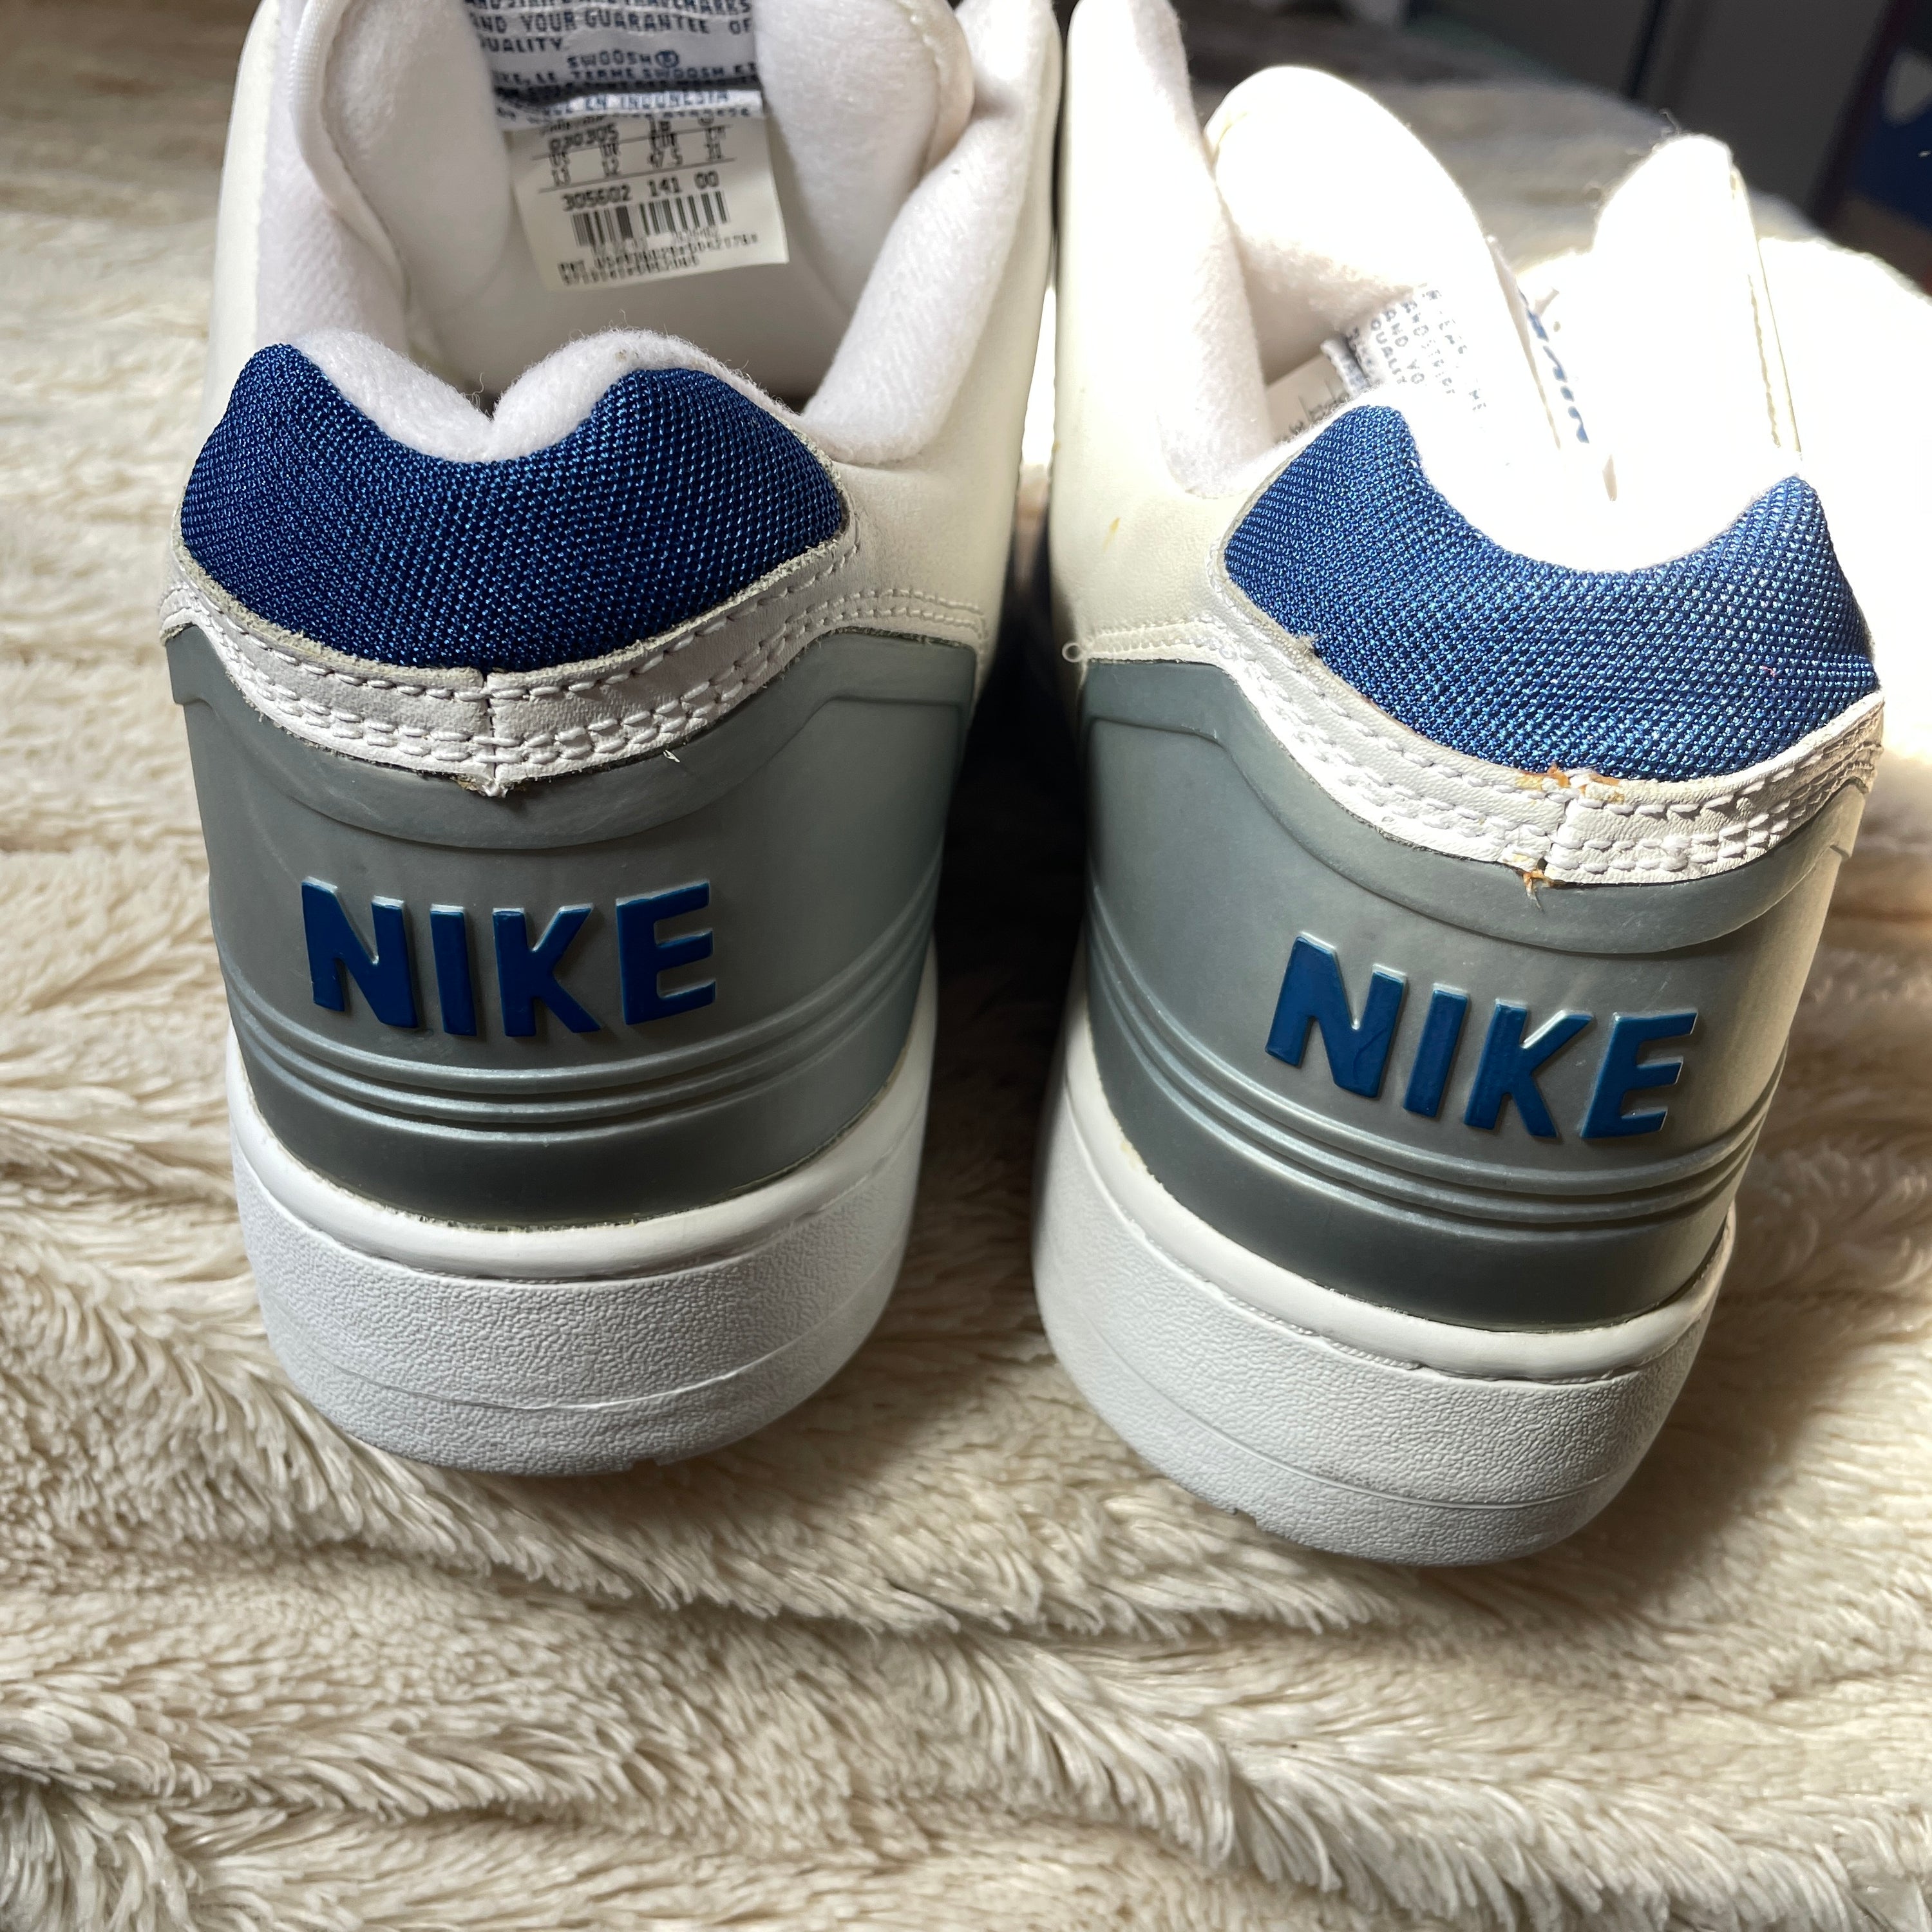 US 13 - NIKE AIR FORCE 2 LOW "WHITE BLUE SILVER" [2003]